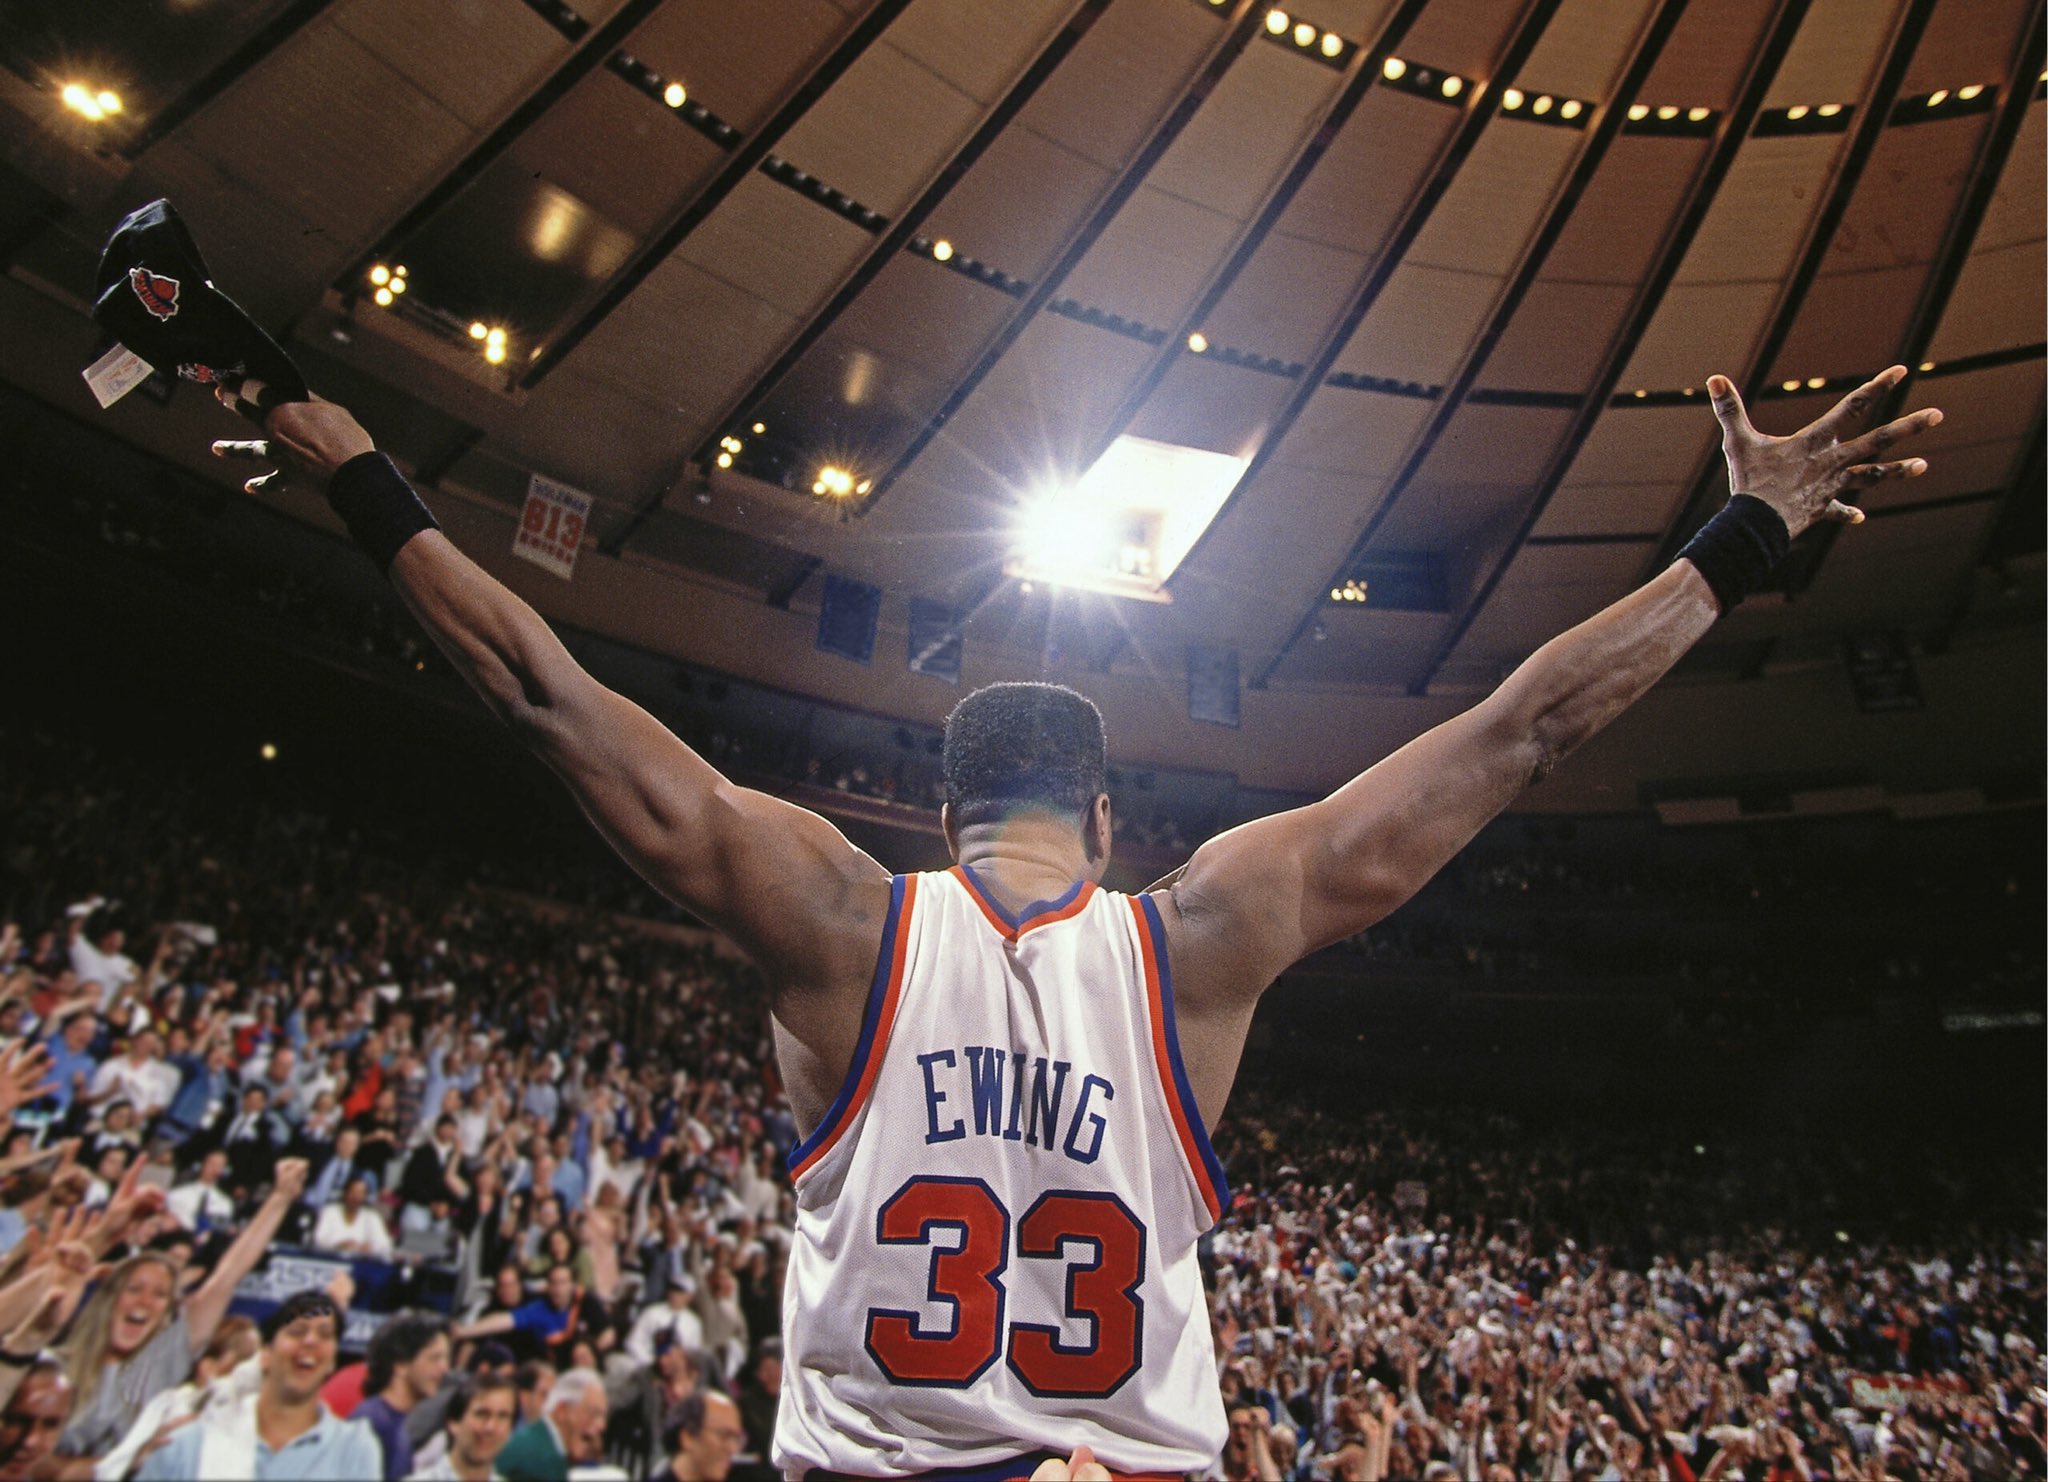 Happy Birthday to the great Patrick Ewing! 